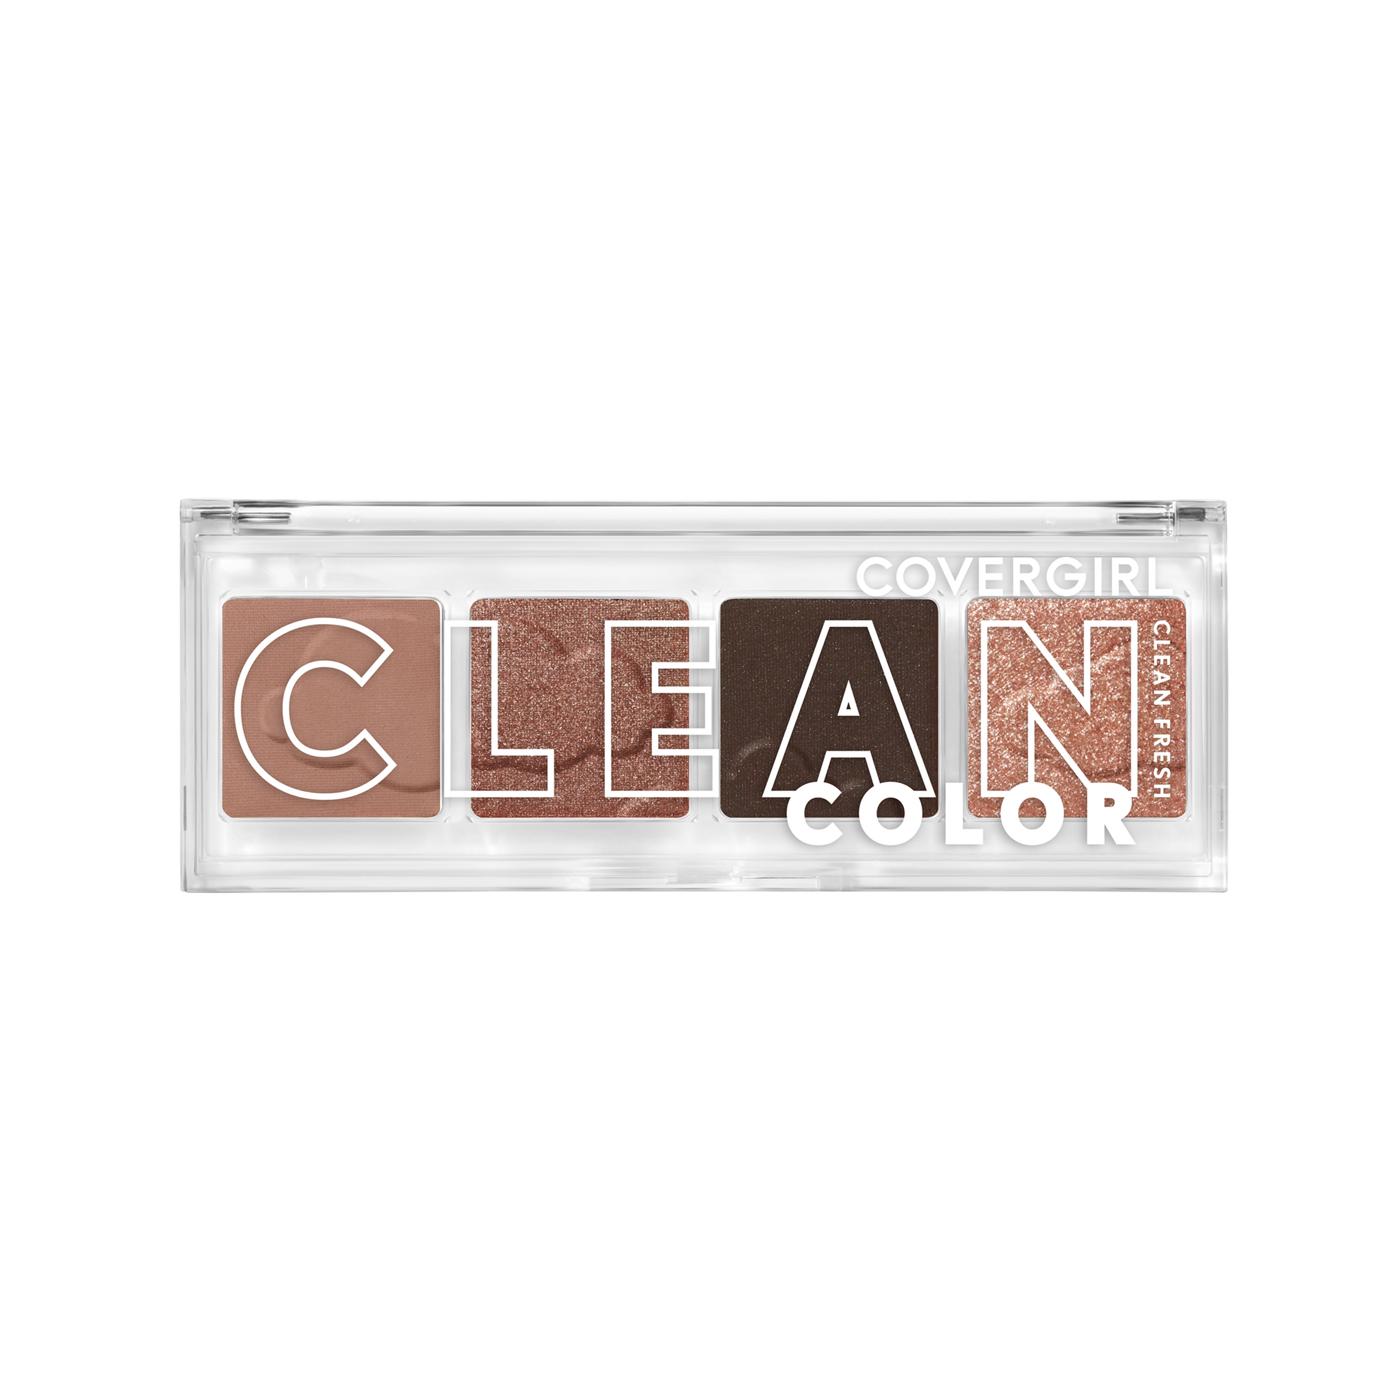 Covergirl Clean Fresh Color Eyeshadow - Cool Berry; image 1 of 10